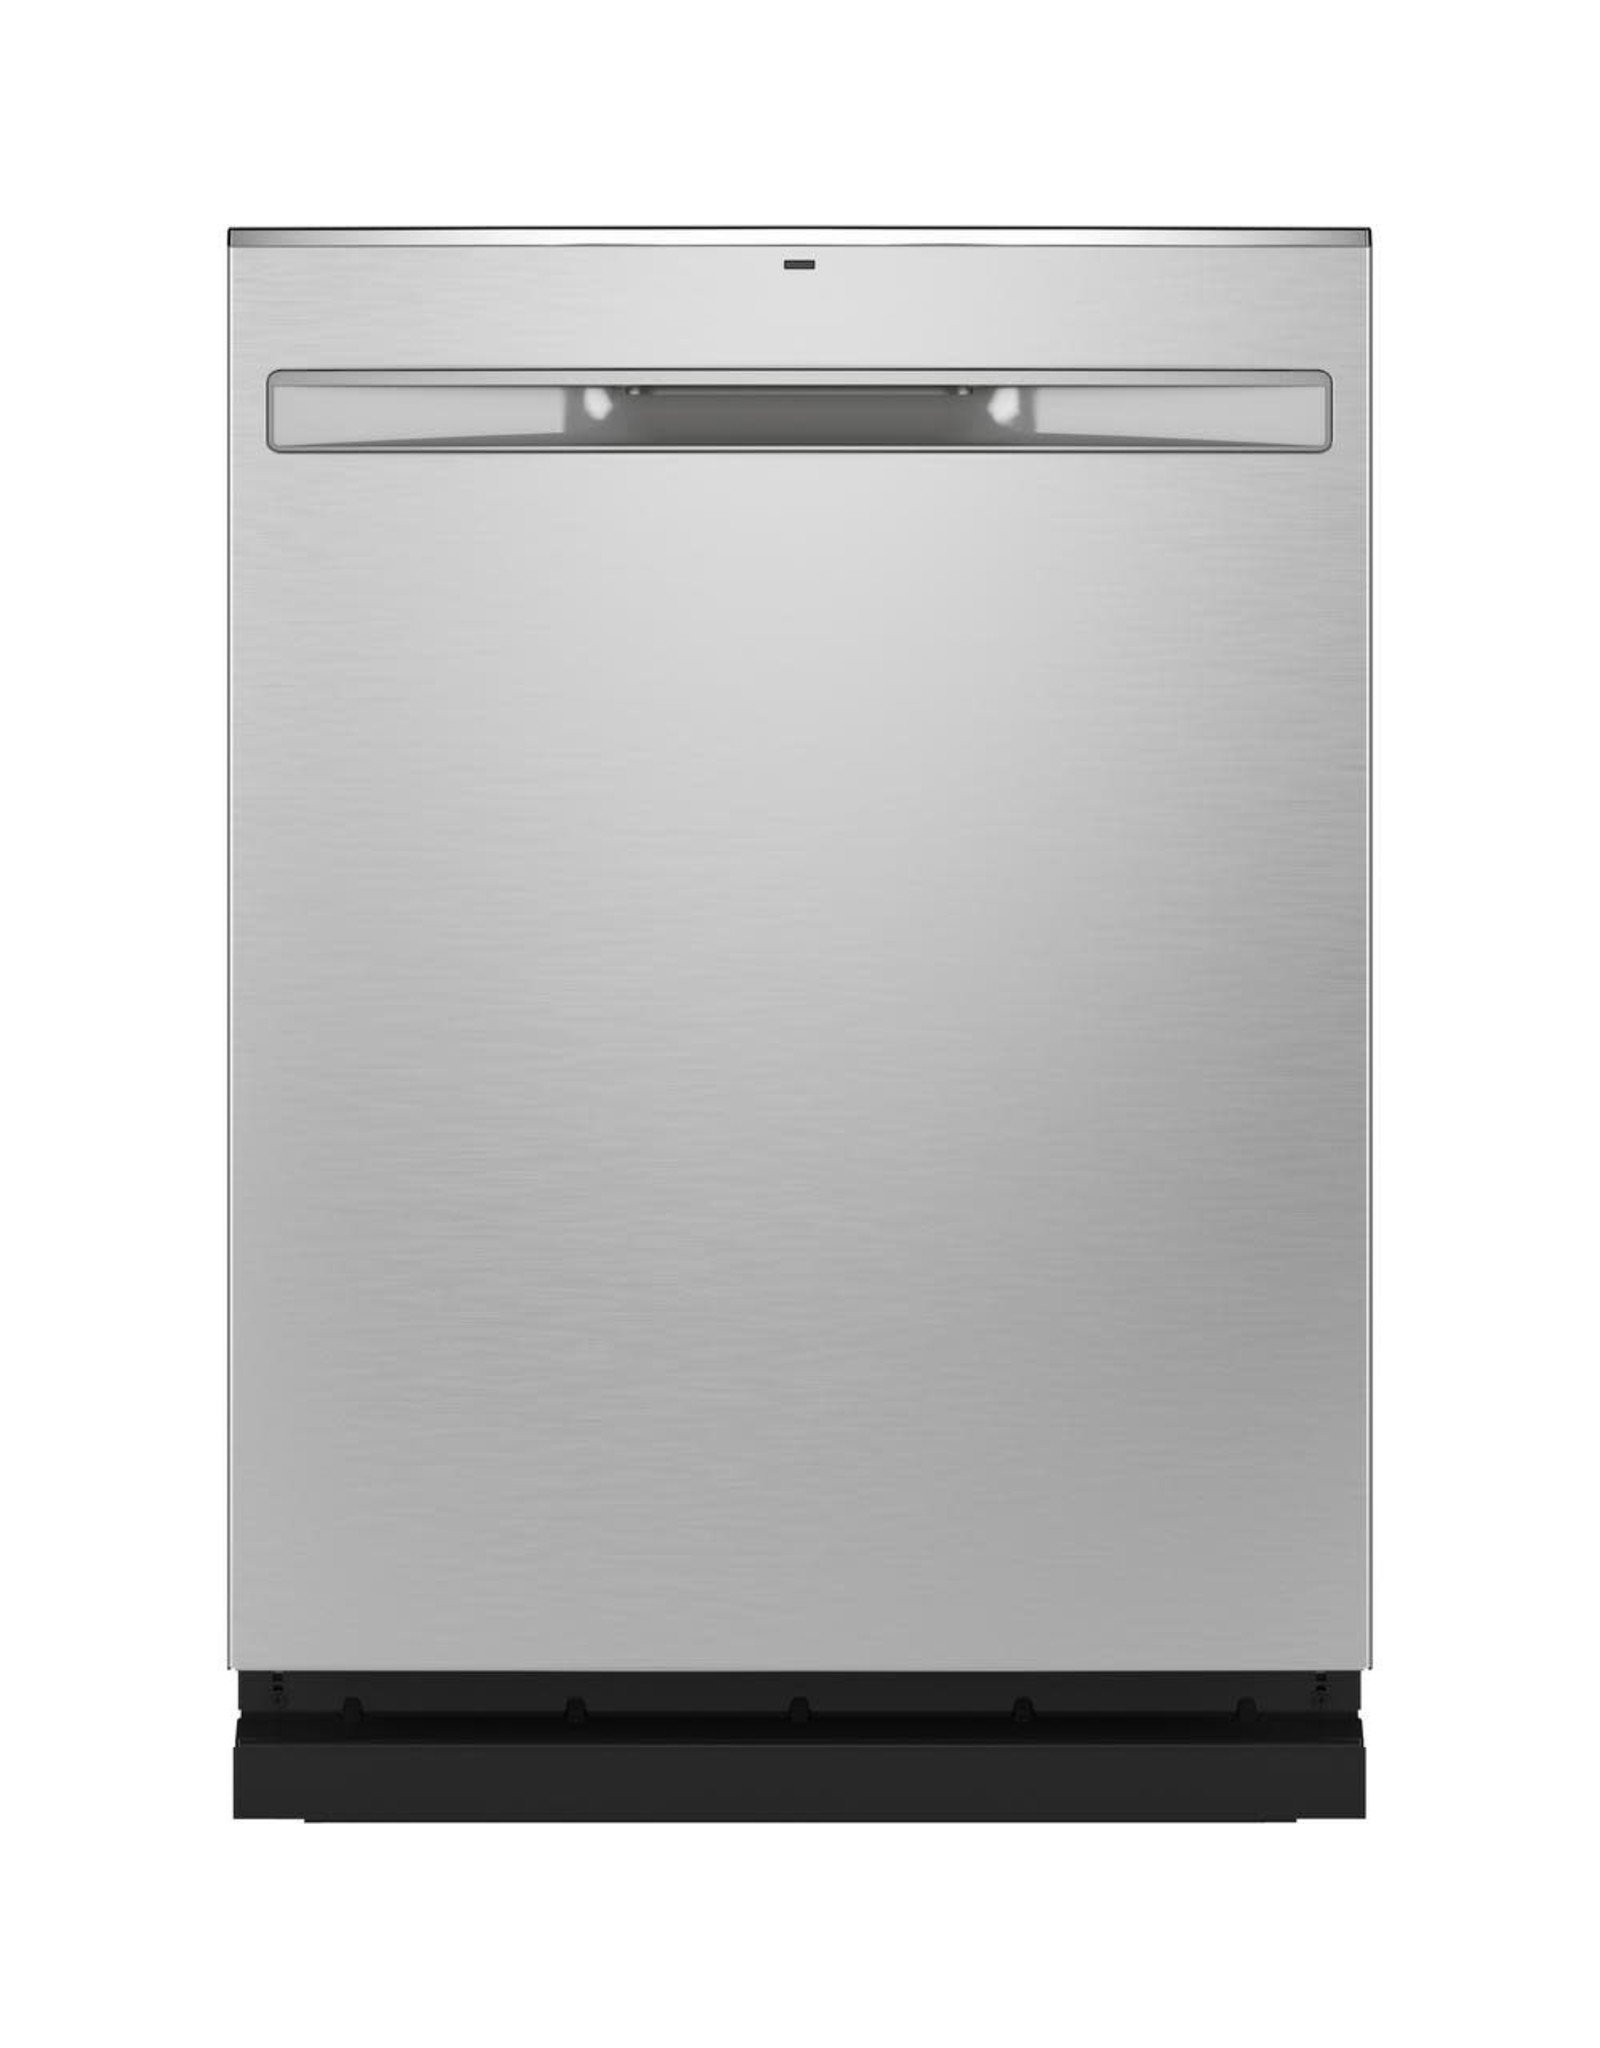 GE GDP645SYNFS  Top Control Tall Tub Dishwasher in Fingerprint Resistant Stainless Steel with Stainless Steel Tub, ENERGY STAR, 48 dBA